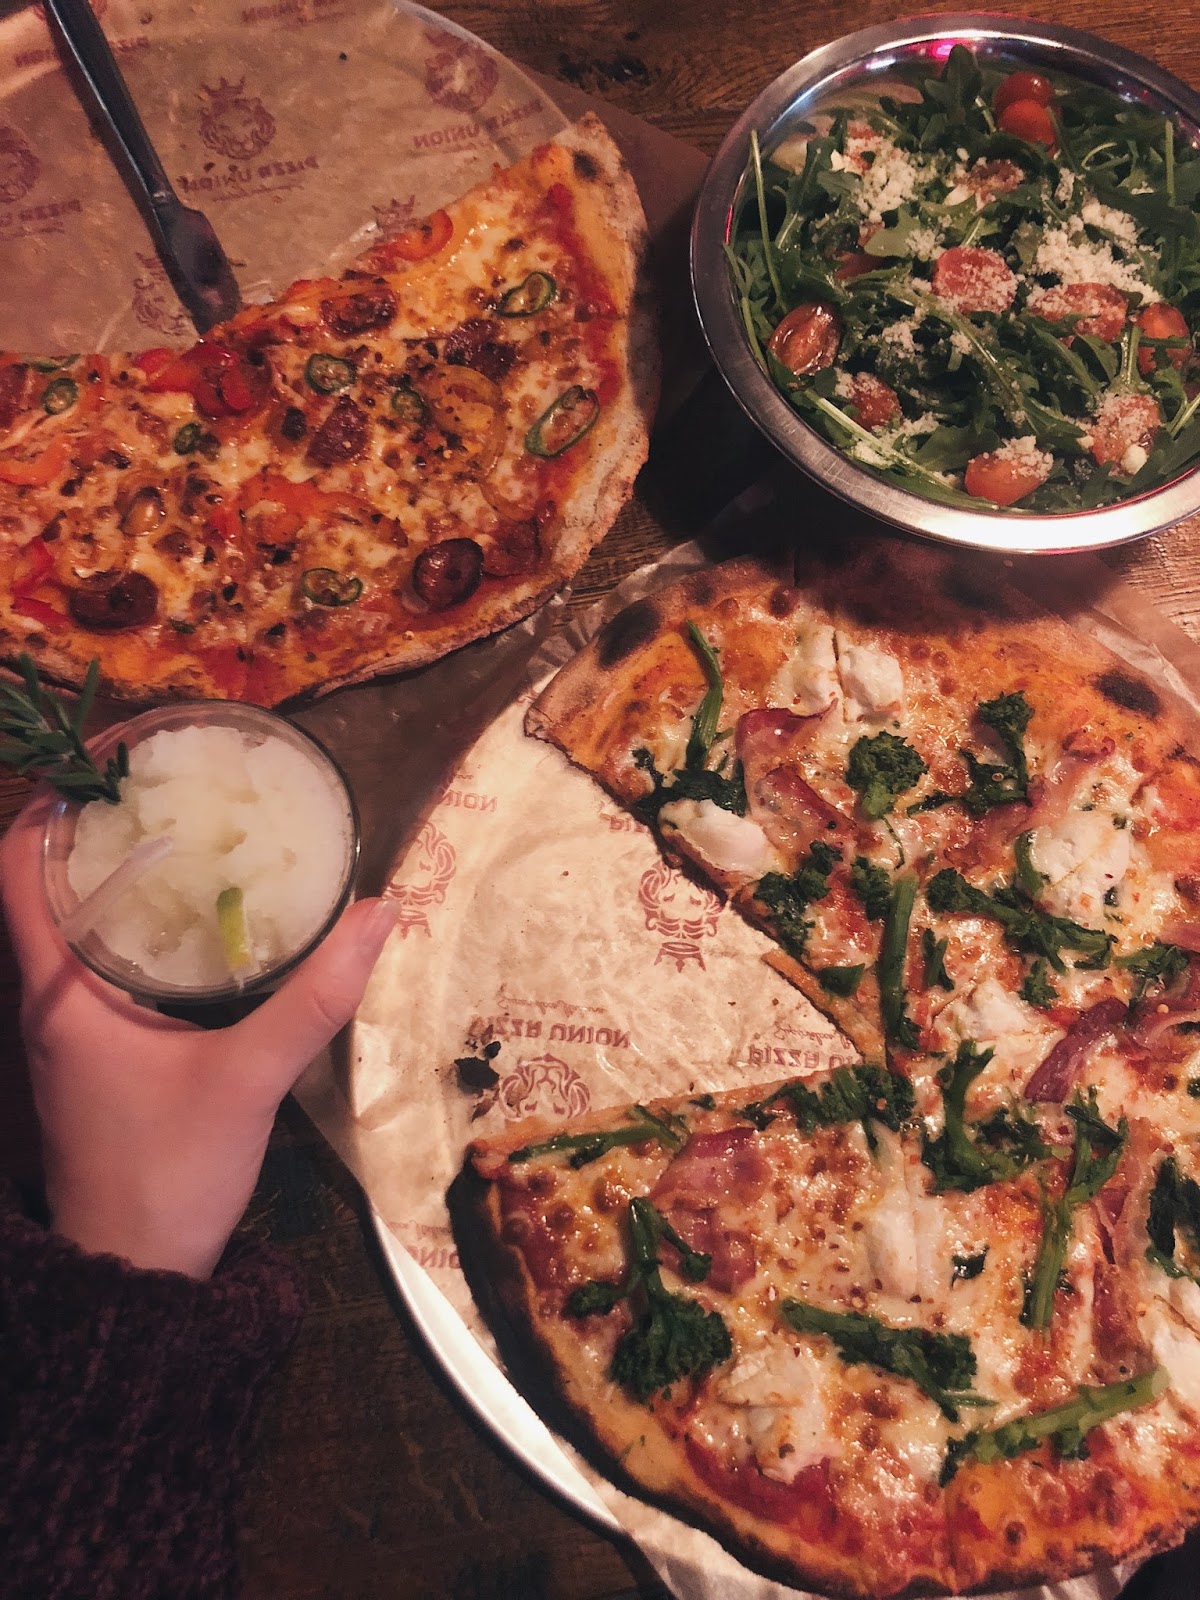 Selection of pizzas and salad